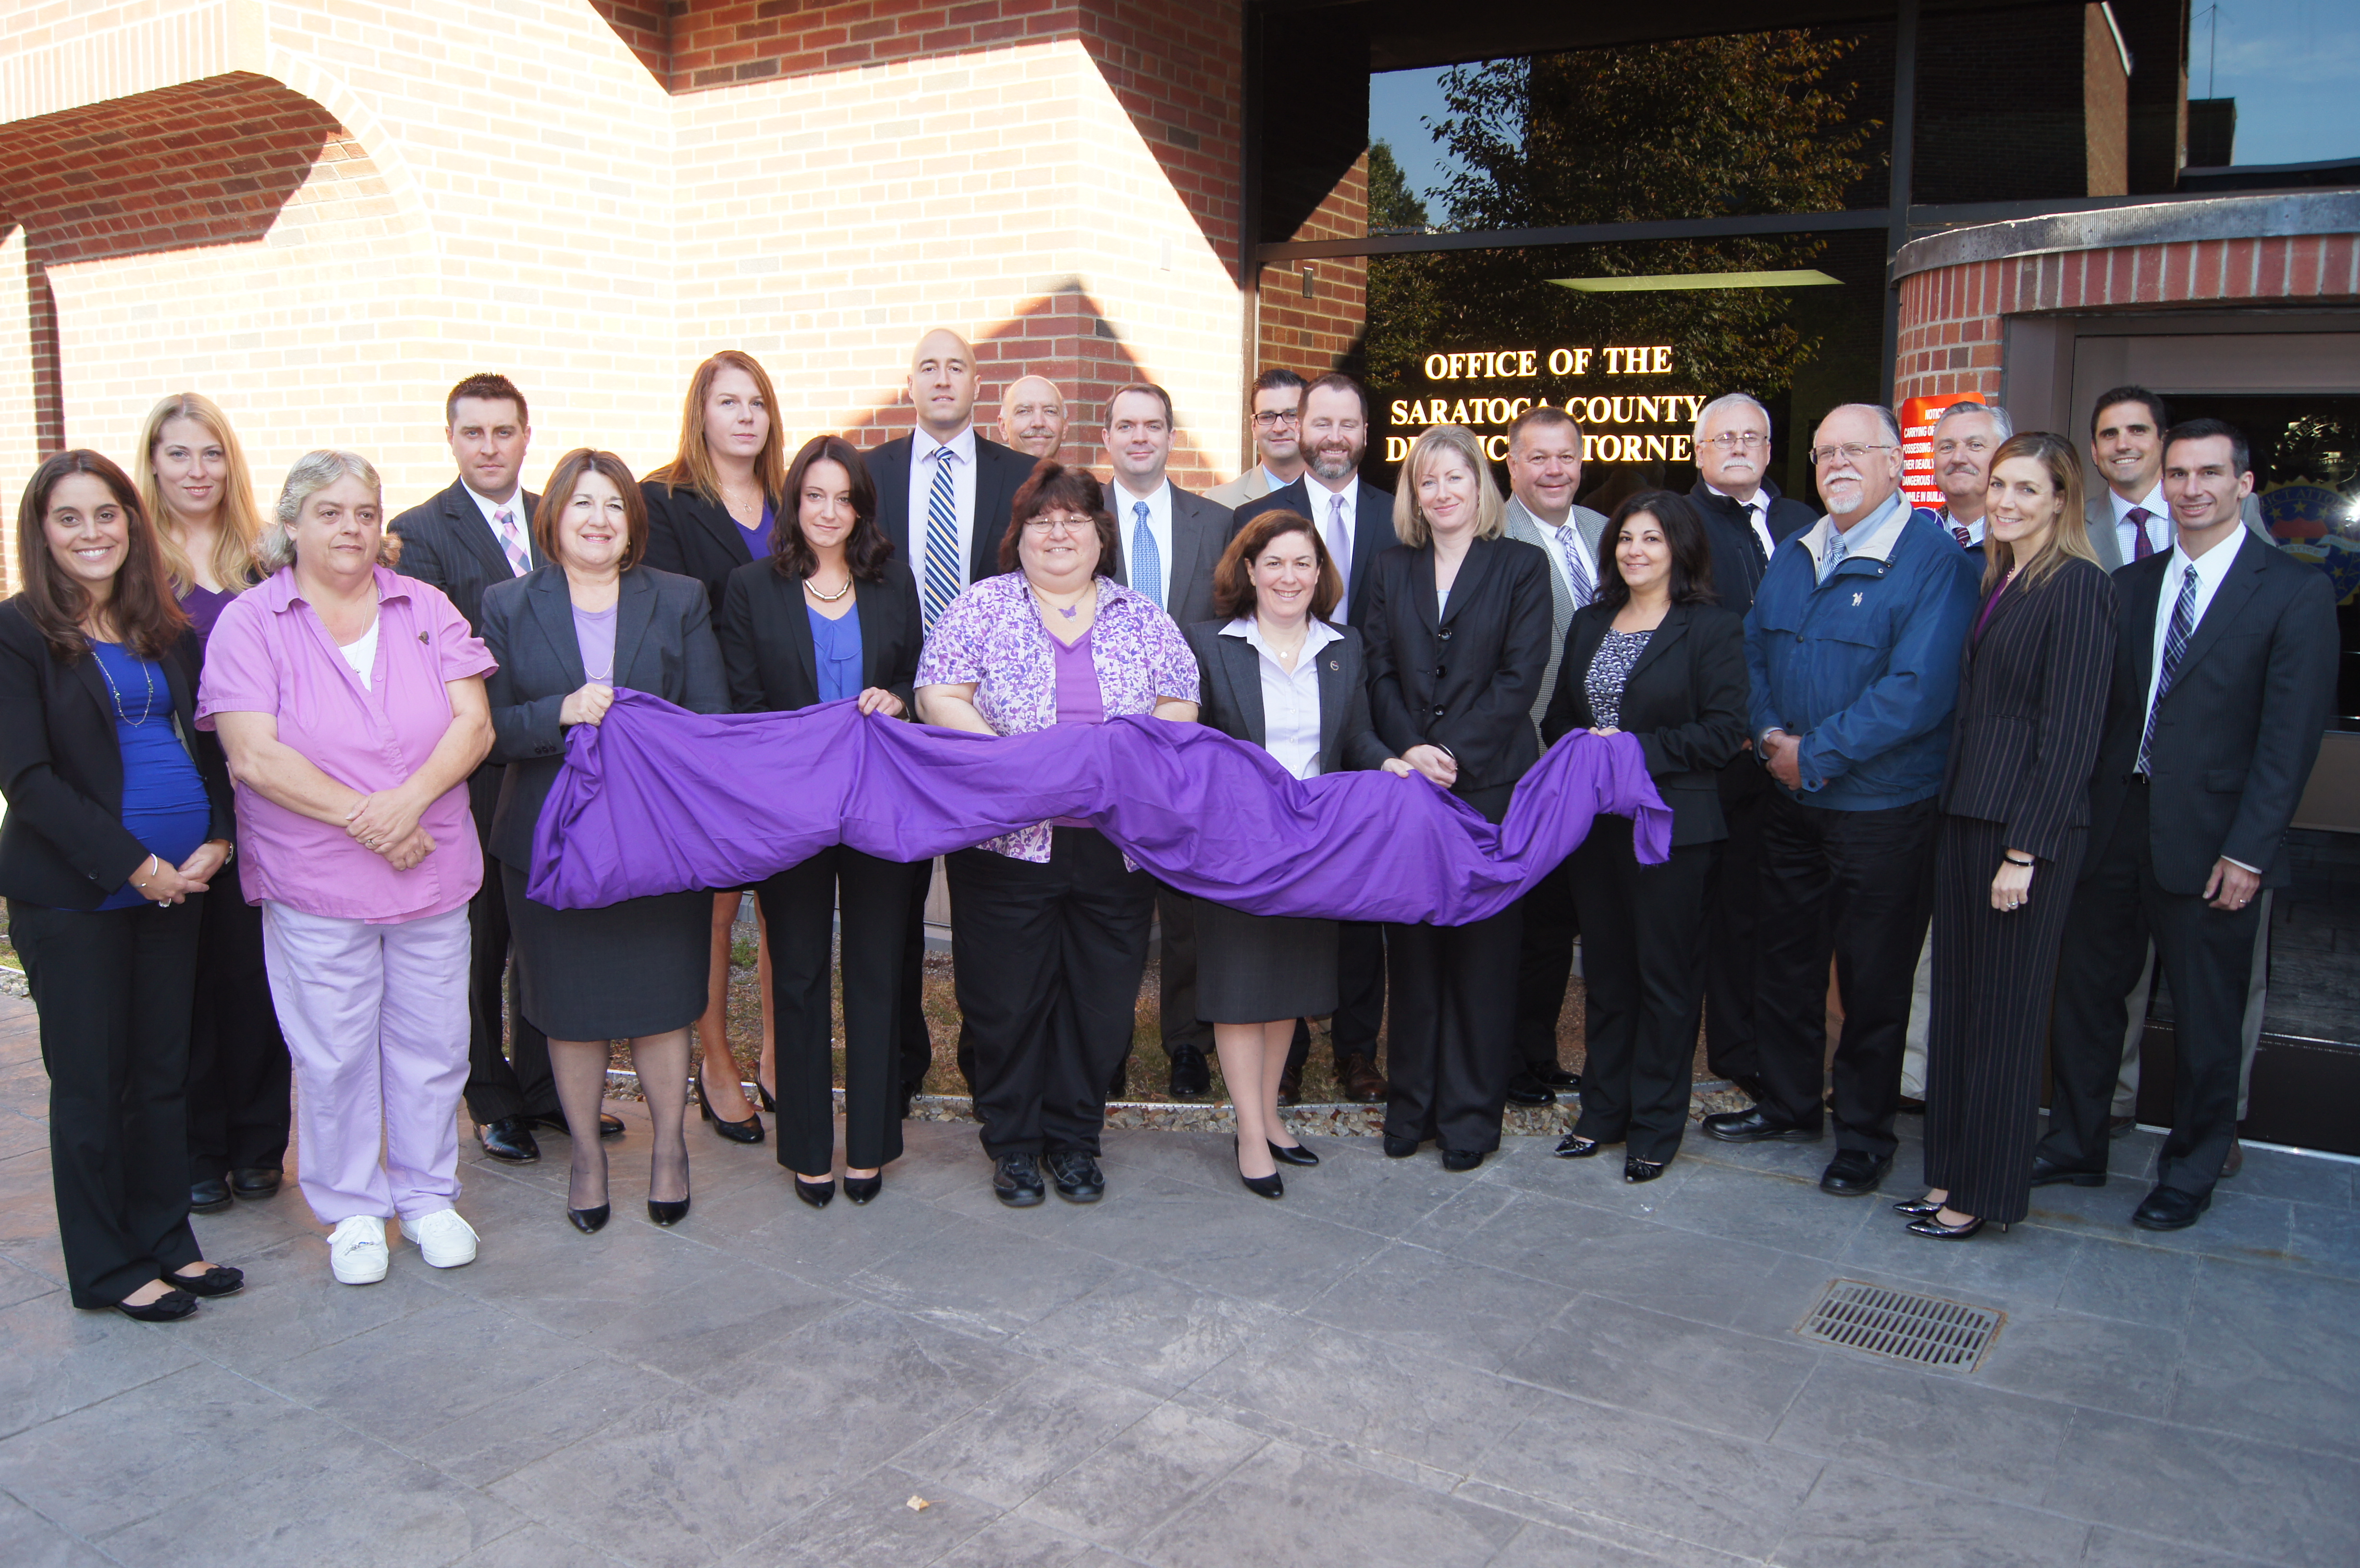 Acting Saratoga County District Attorney Karen Heggen and staff recognize October as “Domestic Violence Awareness Month”.